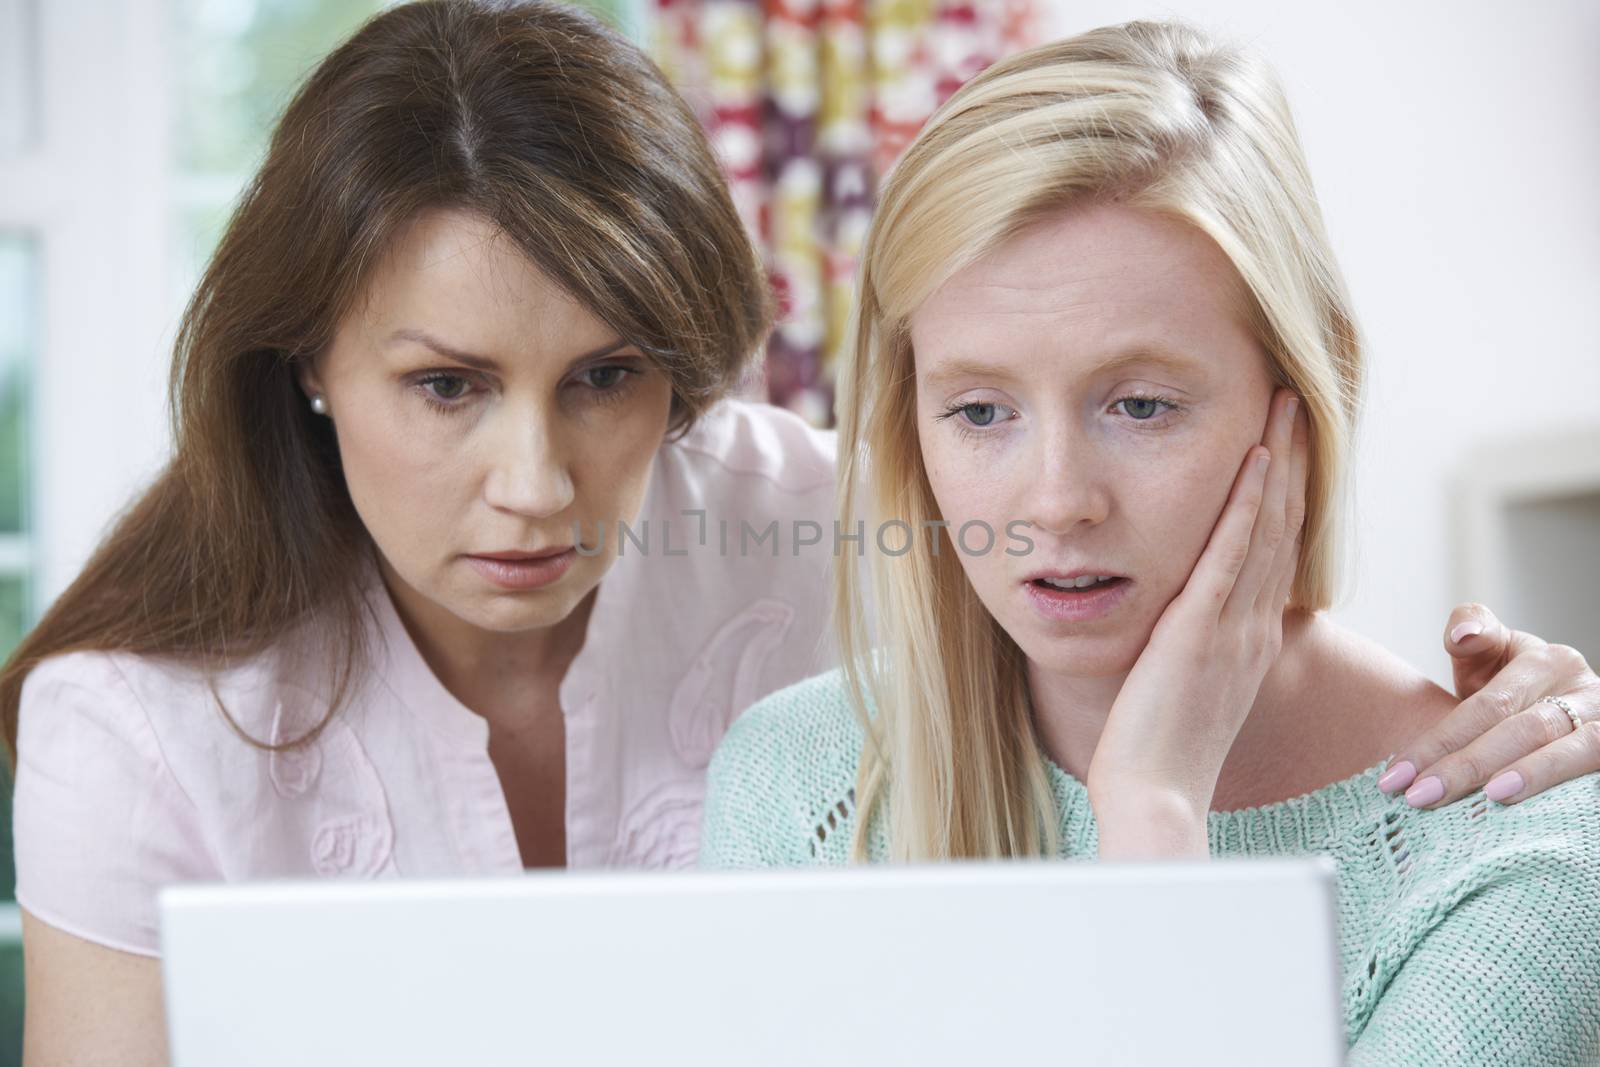 Mother Comforting Daughter Victimized By Online Bullying by HighwayStarz